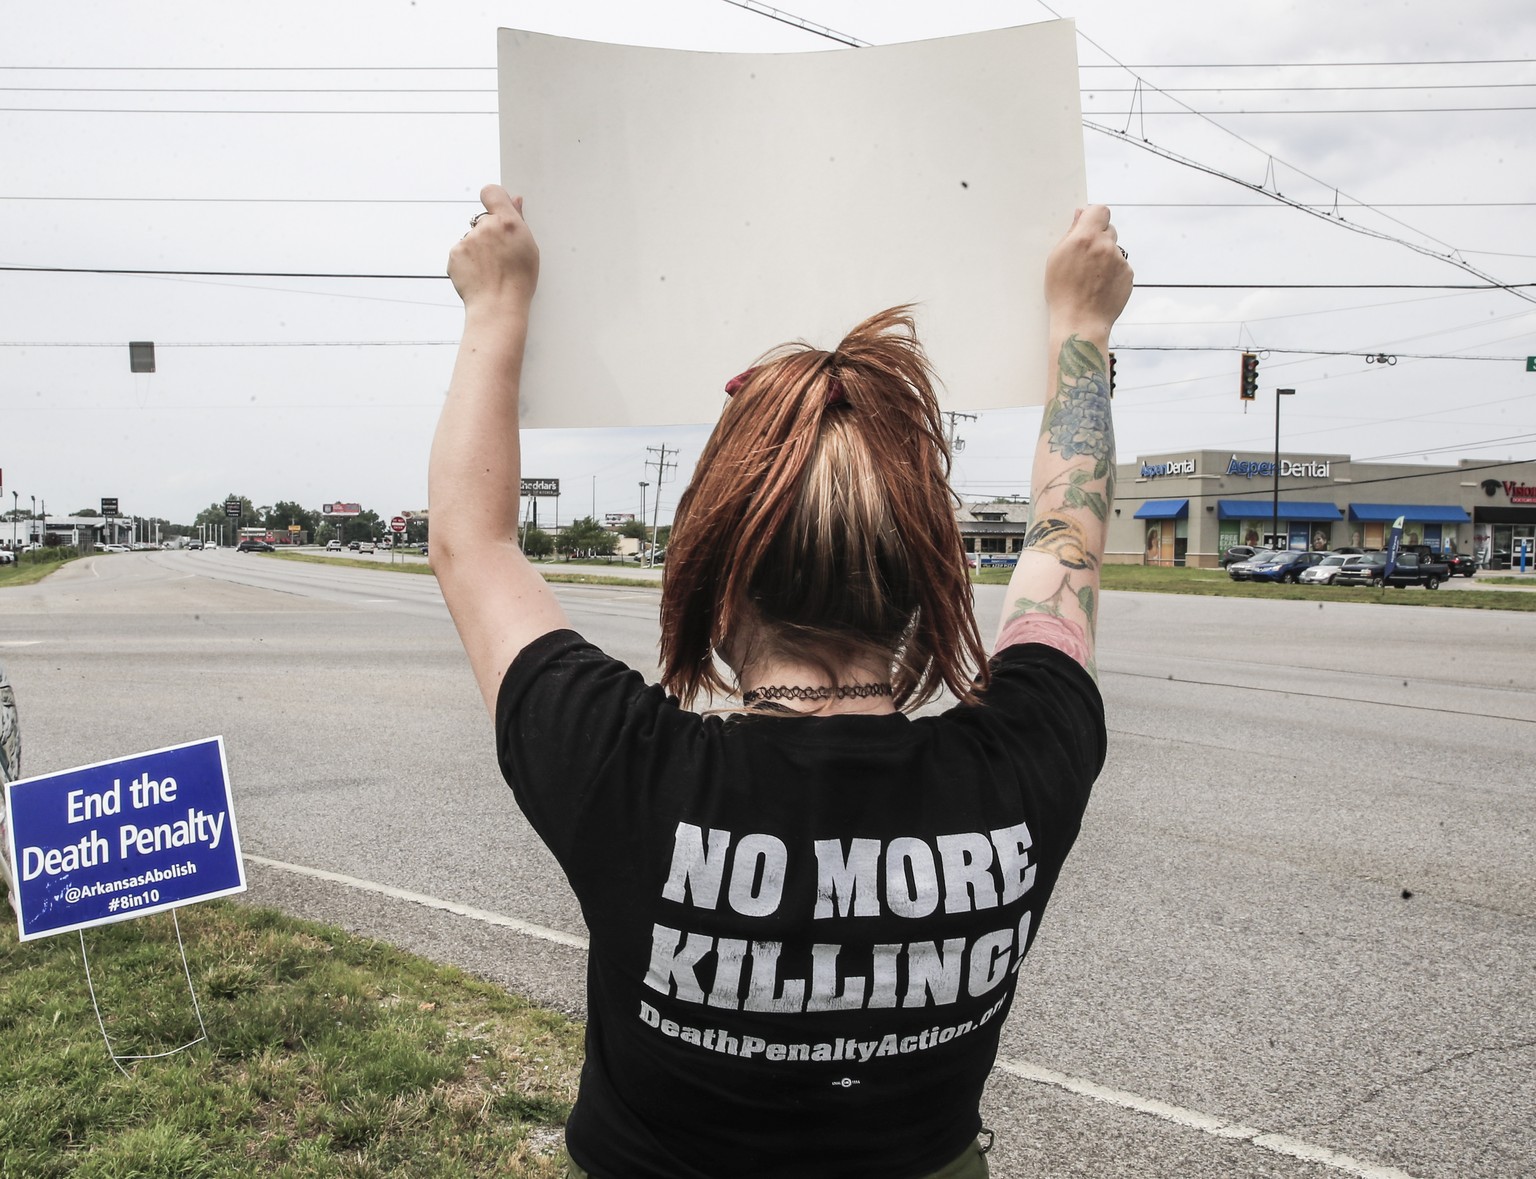 epa08548605 Protestors against the death penalty hold signs near the Federal Correctional Complex where the federal execution chamber is located in Terre Haute, Indiana, USA, 15 July 2020. As holds pl ...